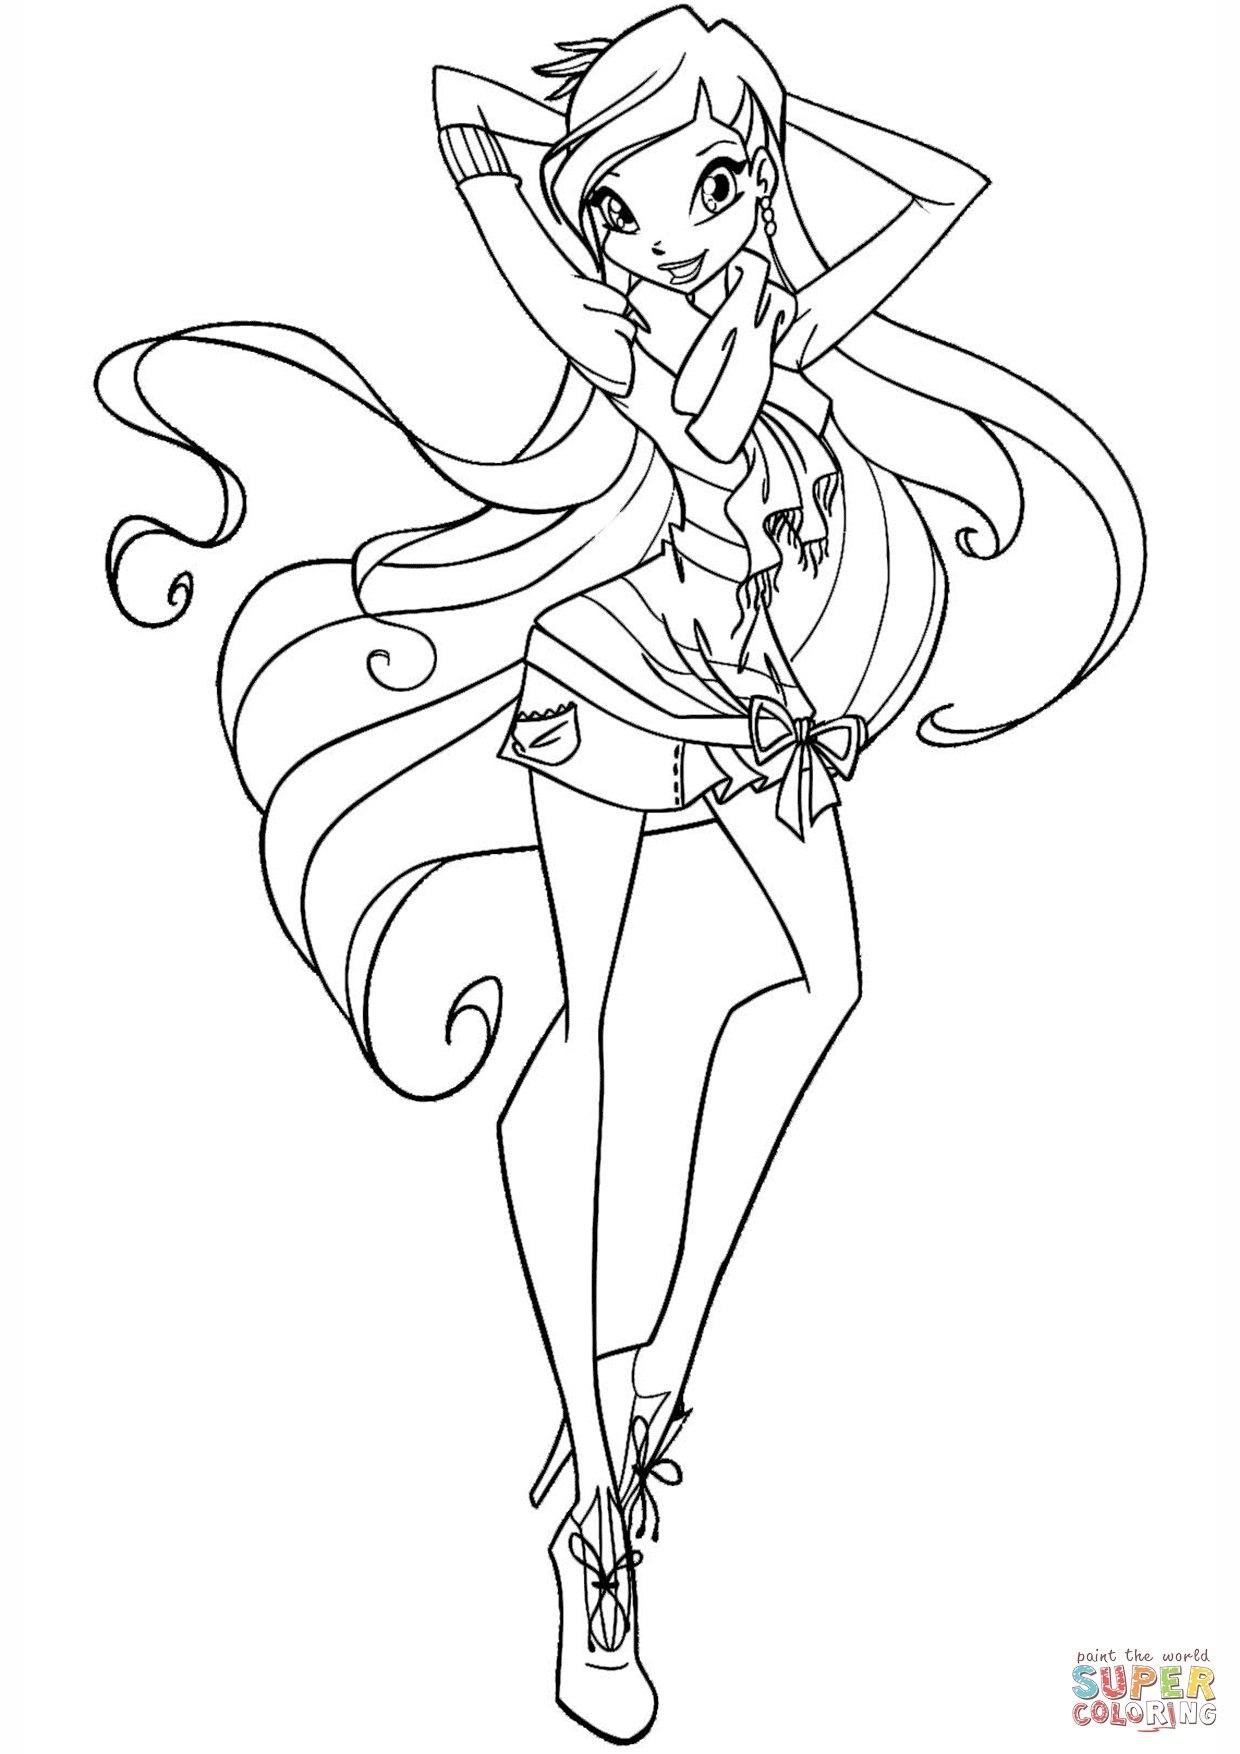 Winx Club Bloomix Coloring Pages at GetColorings.com | Free printable